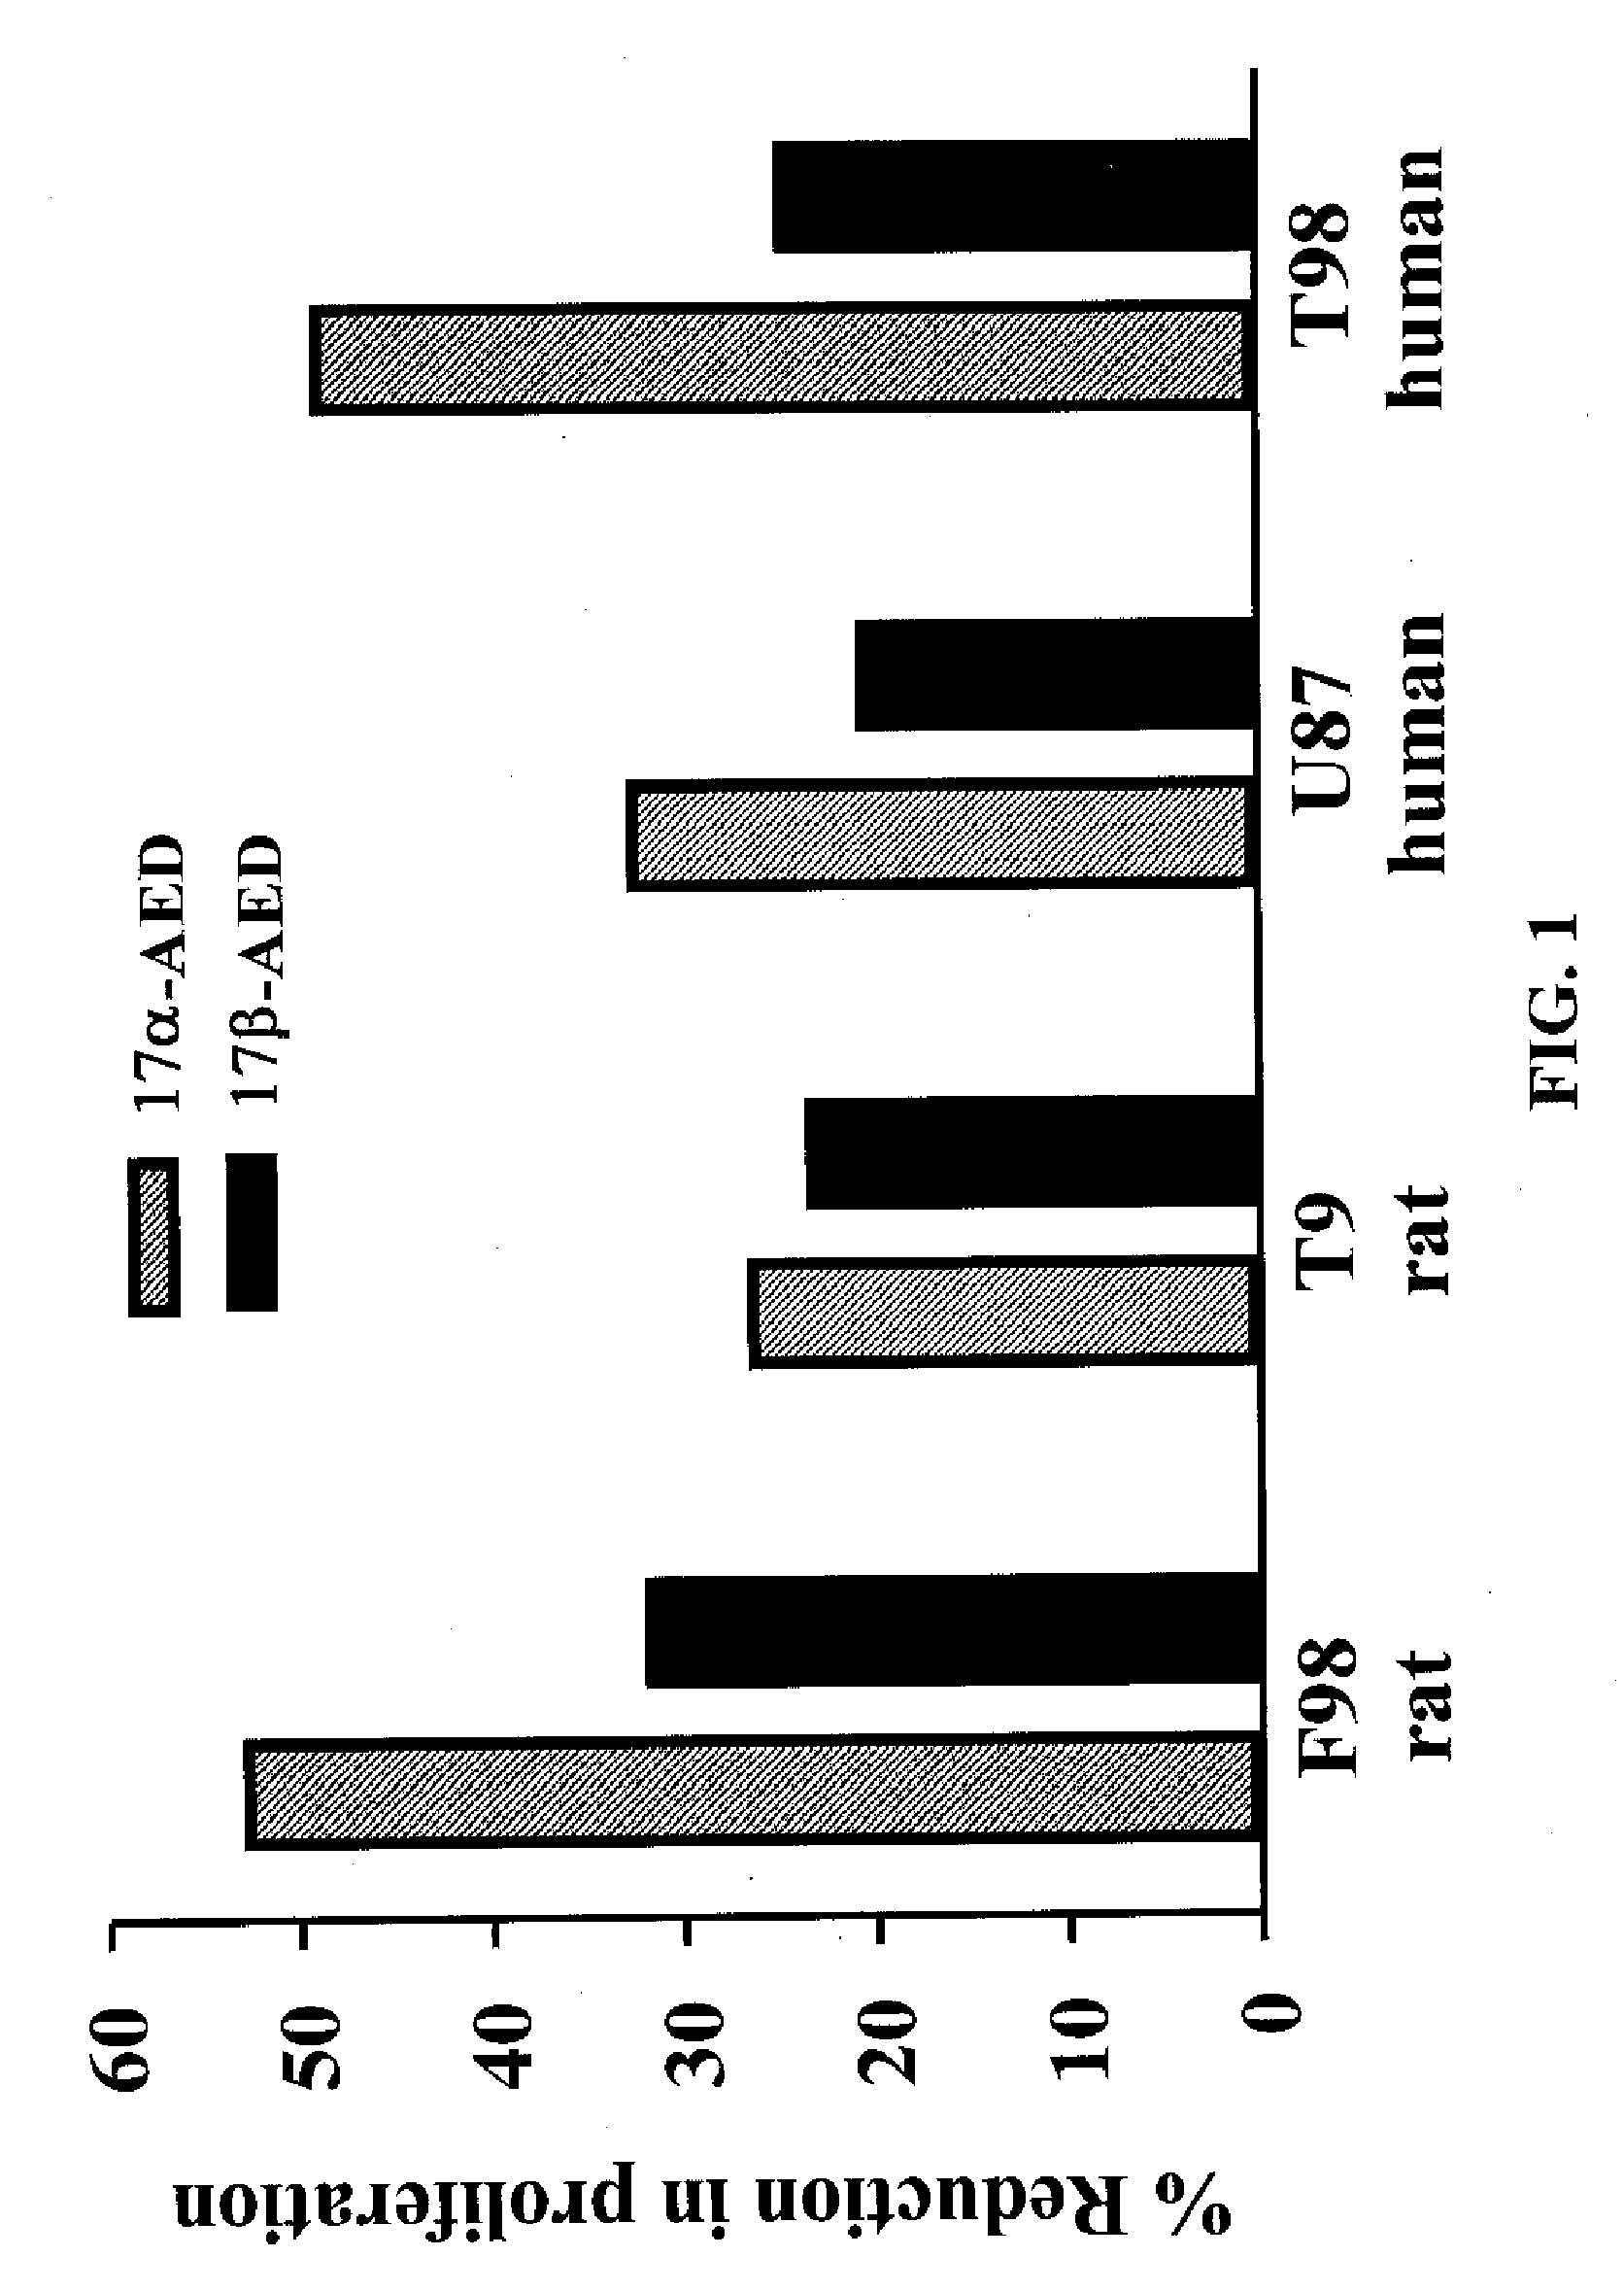 5-Androstenediol As An Inhibitor of Gliomas